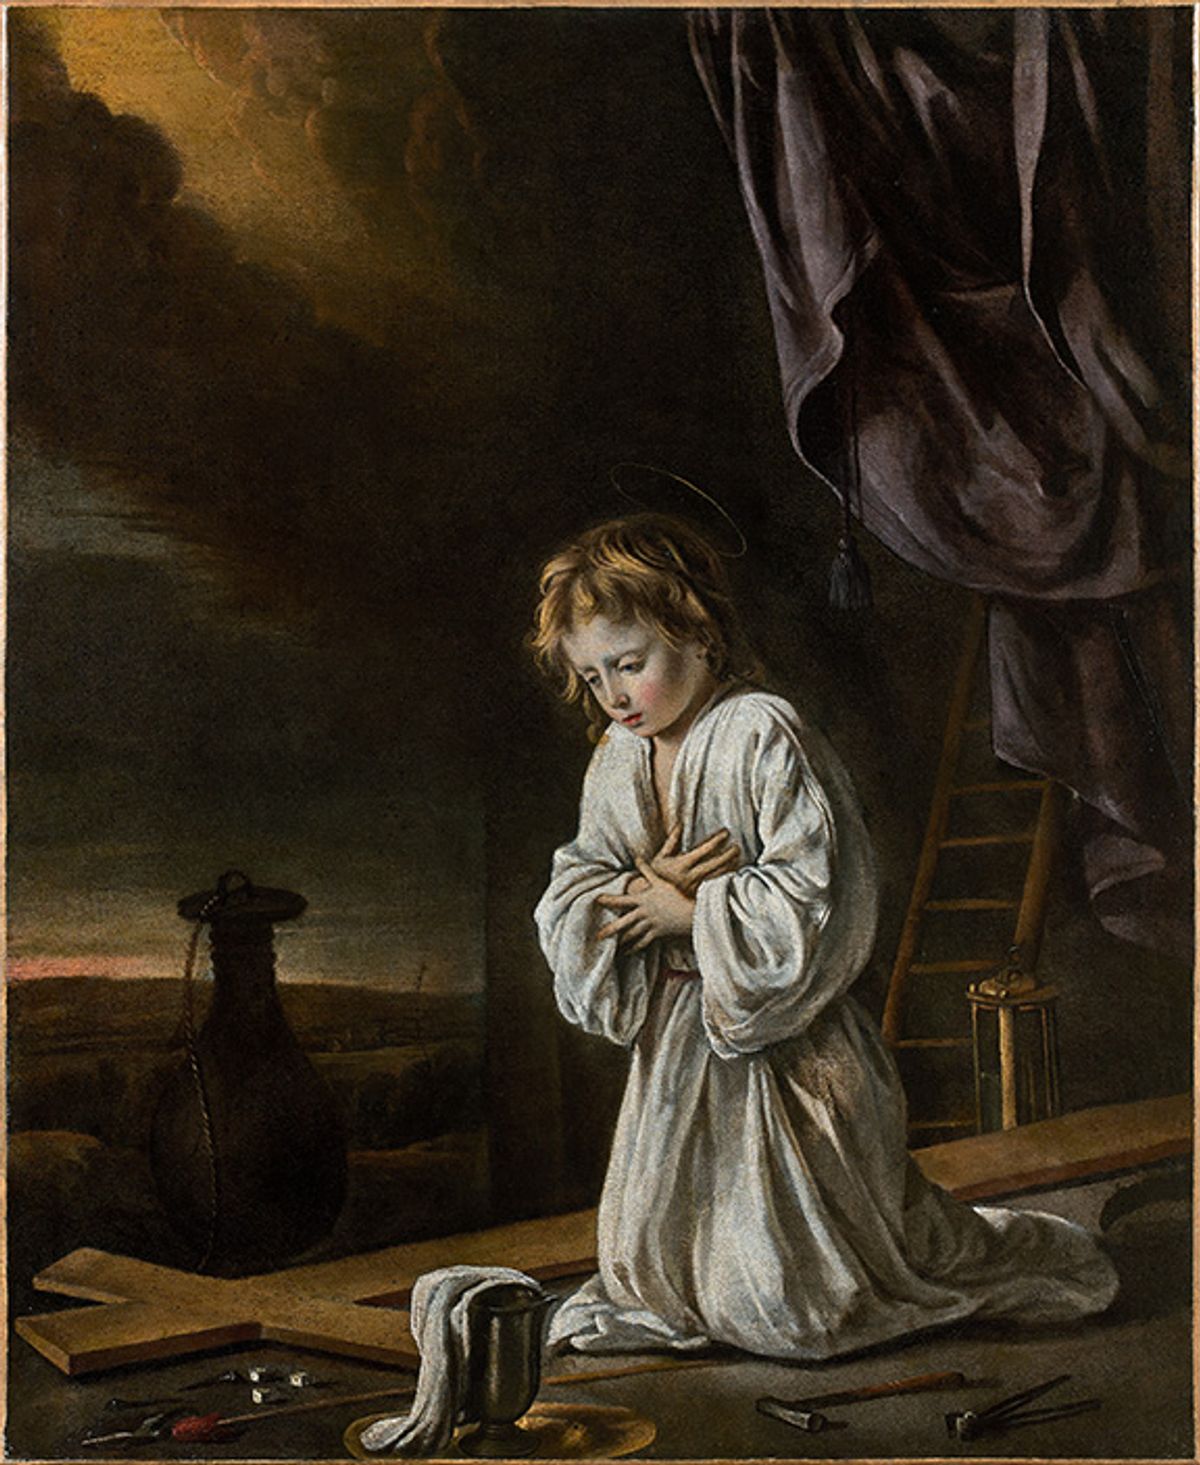 L'enfant Jésus en adoration de la croix (1642-48) was recently discovered in a French collection and attributed to the Le Nain brothers Courtesy of Rouillac